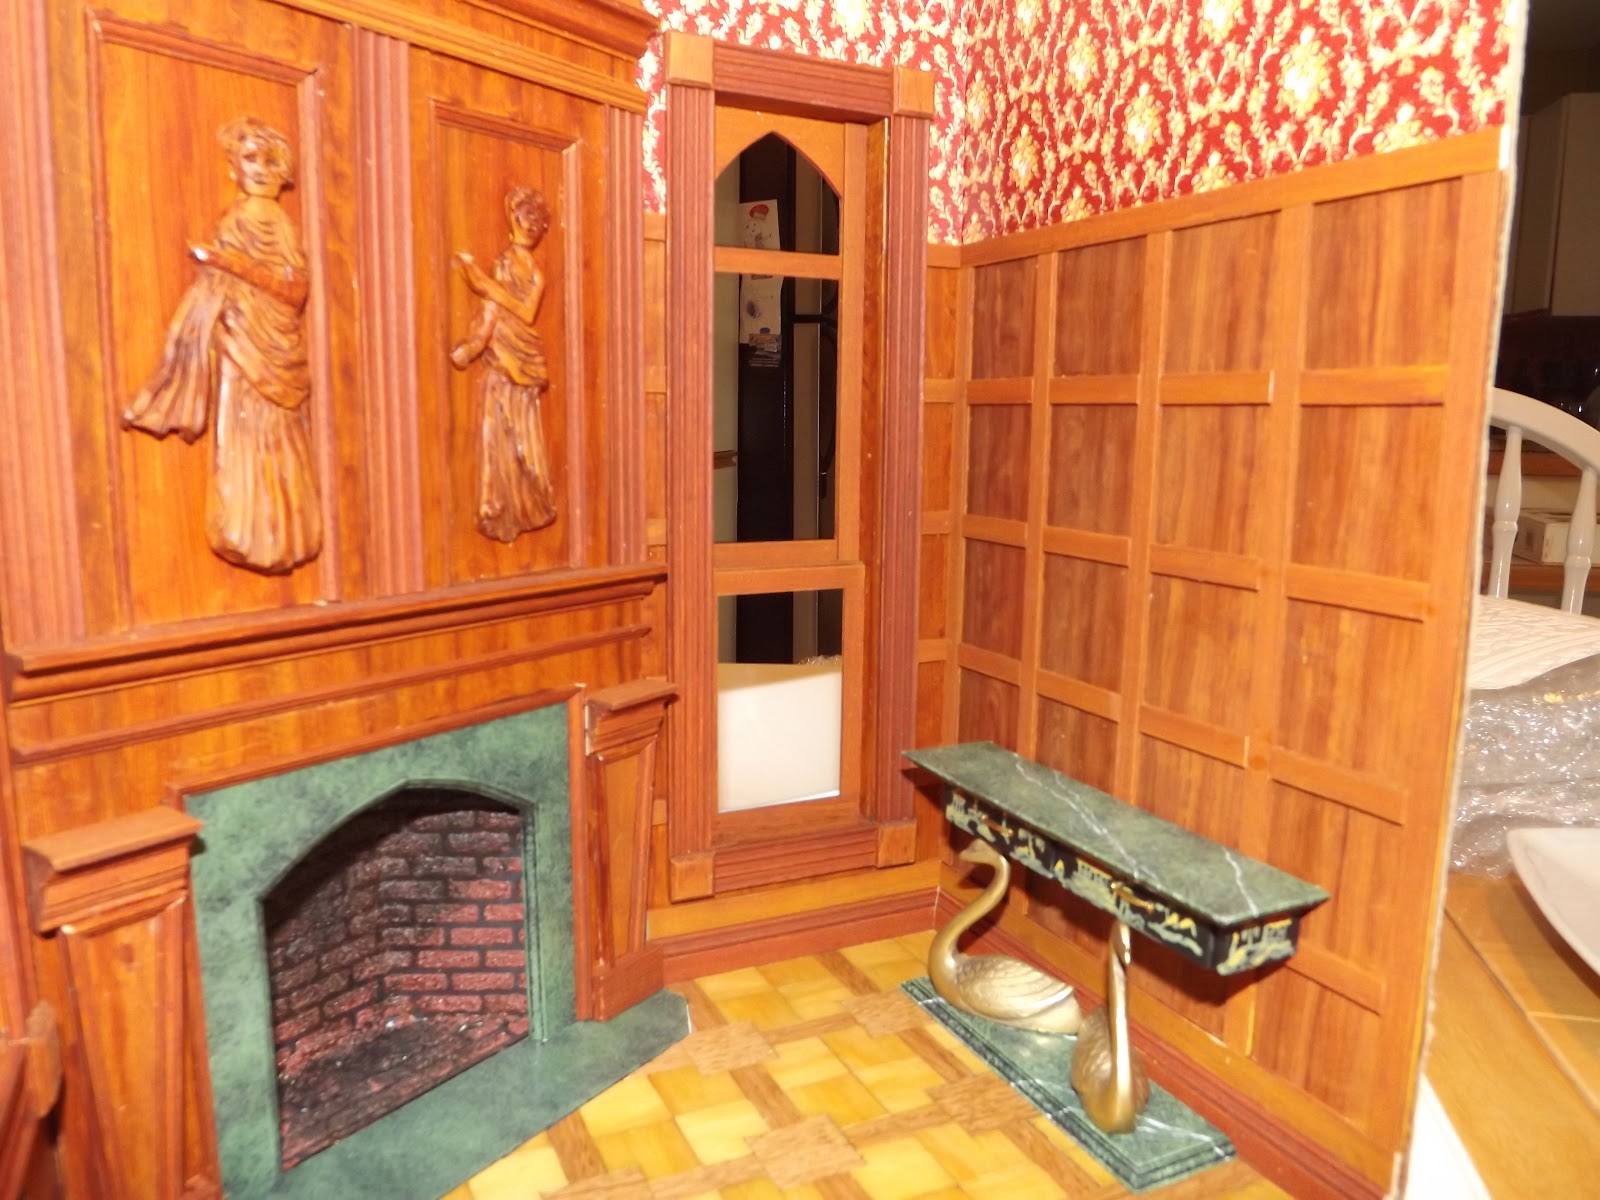 Late Victorian English Manor Dollhouse: 1/12 Miniature from Scratch ...